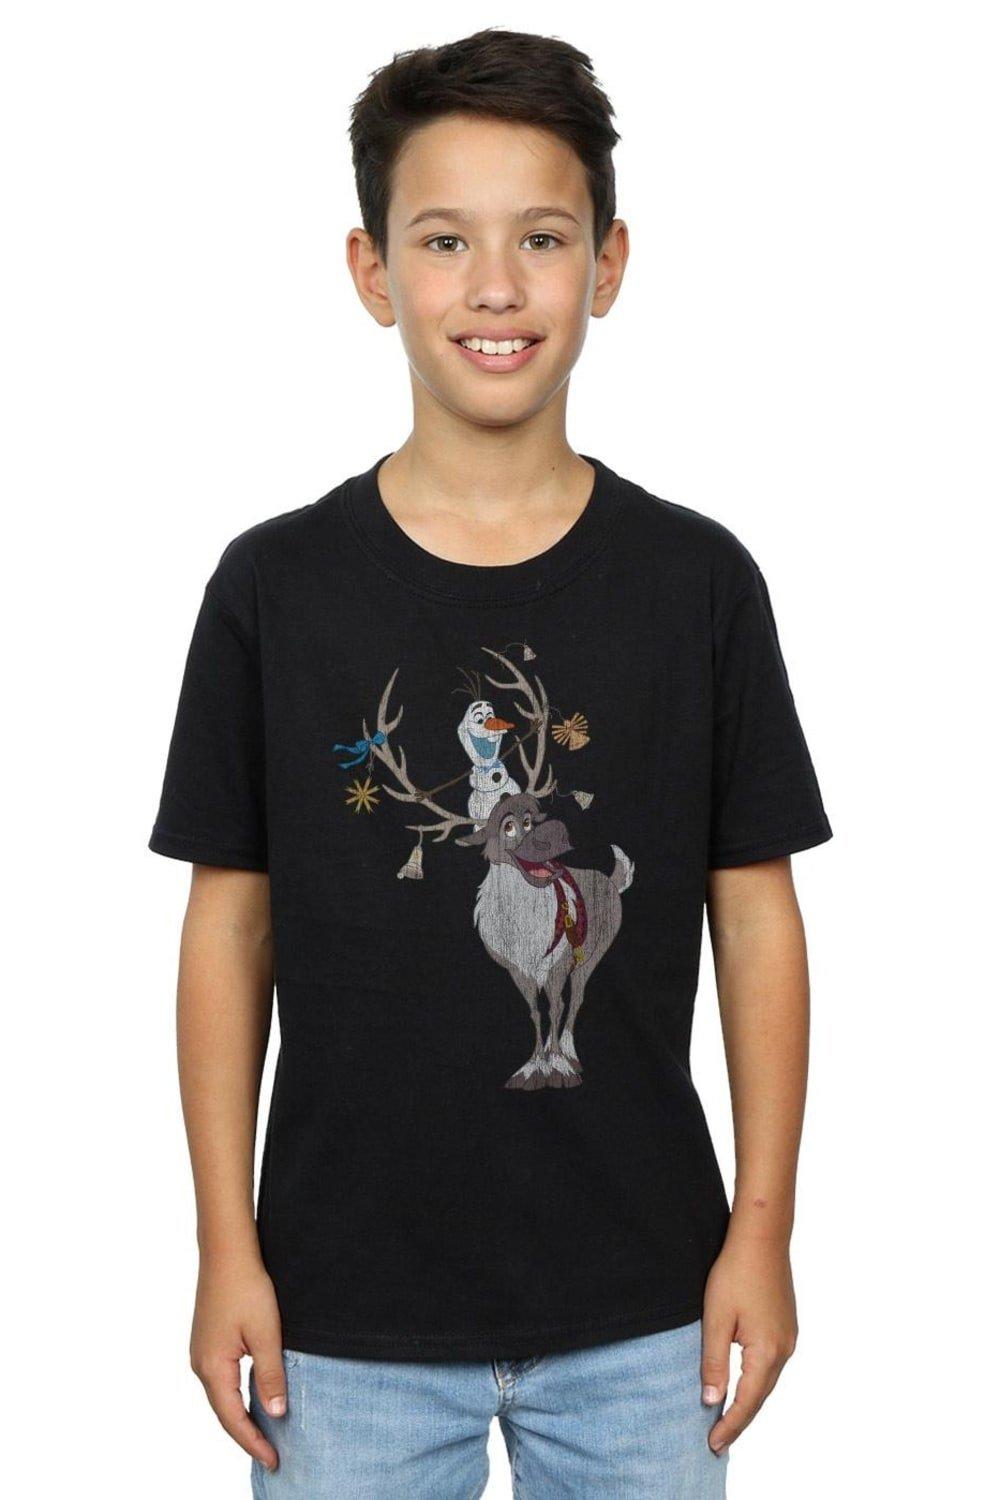 Frozen Sven And Olaf Christmas Ornaments T-Shirt